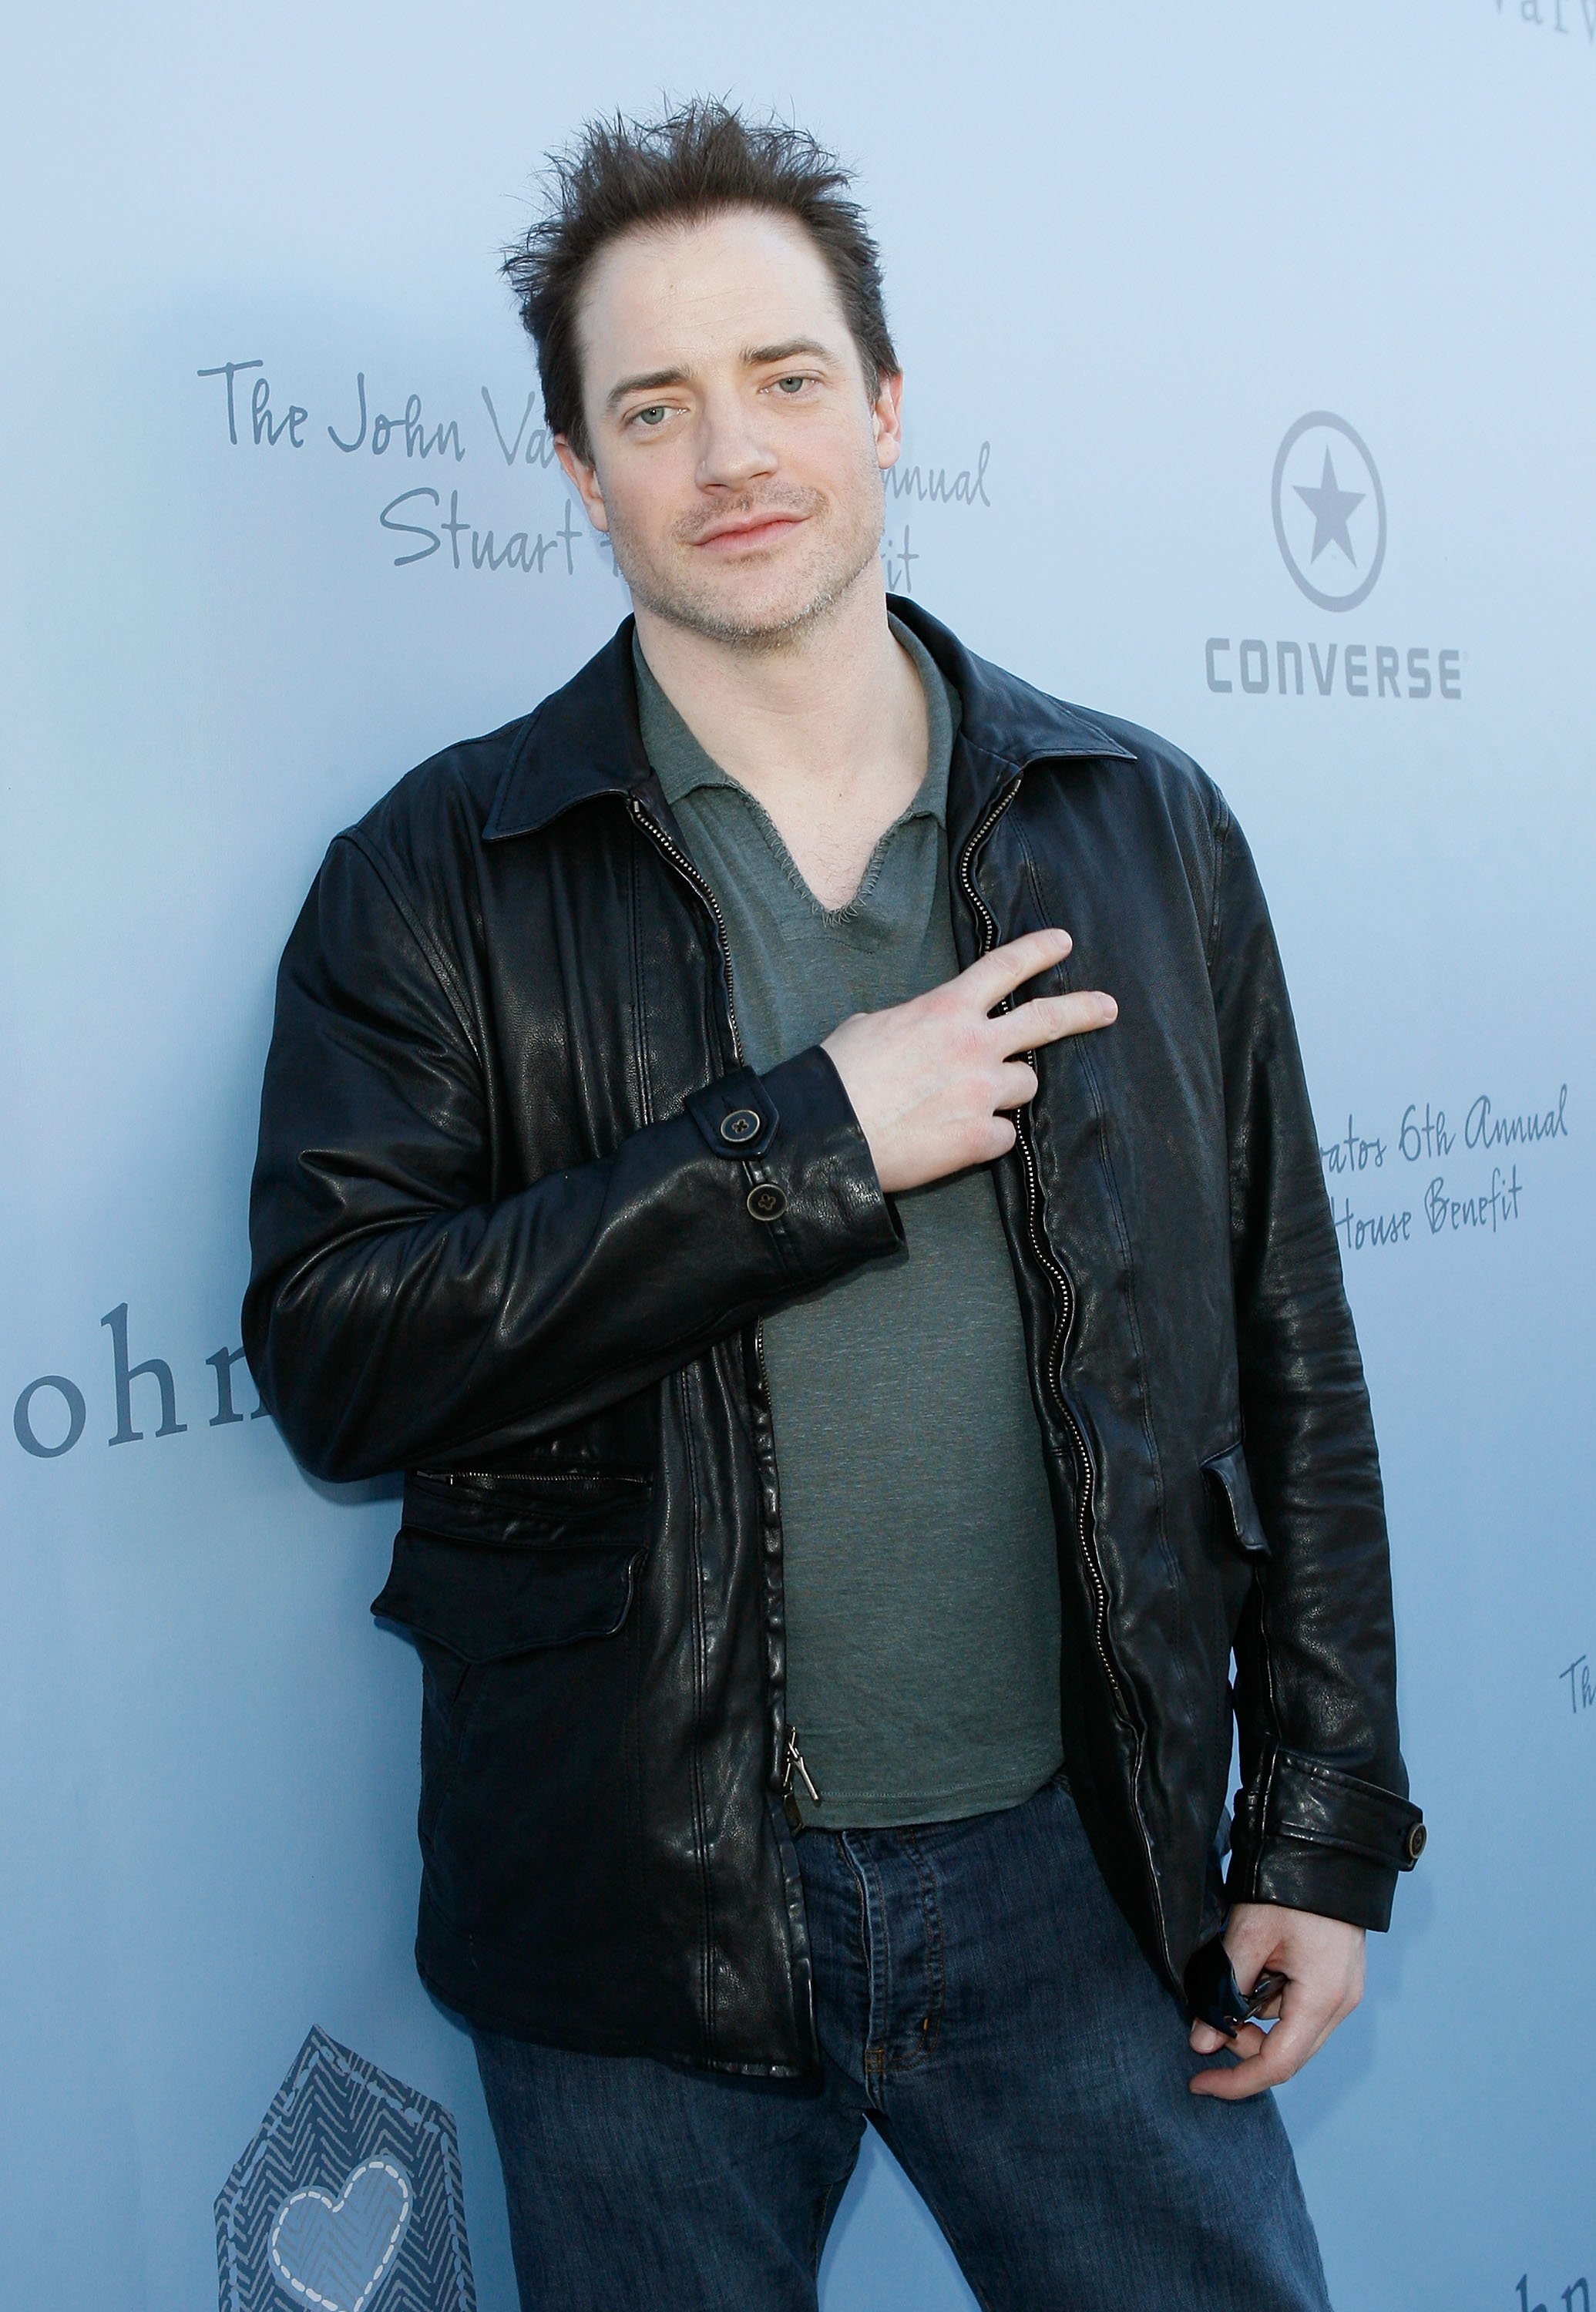 Brendan Fraser at the John Varvatos 6th Annual Stuart House Benefit on March 9, 2008, in West Hollywood, California. | Source: Getty Images